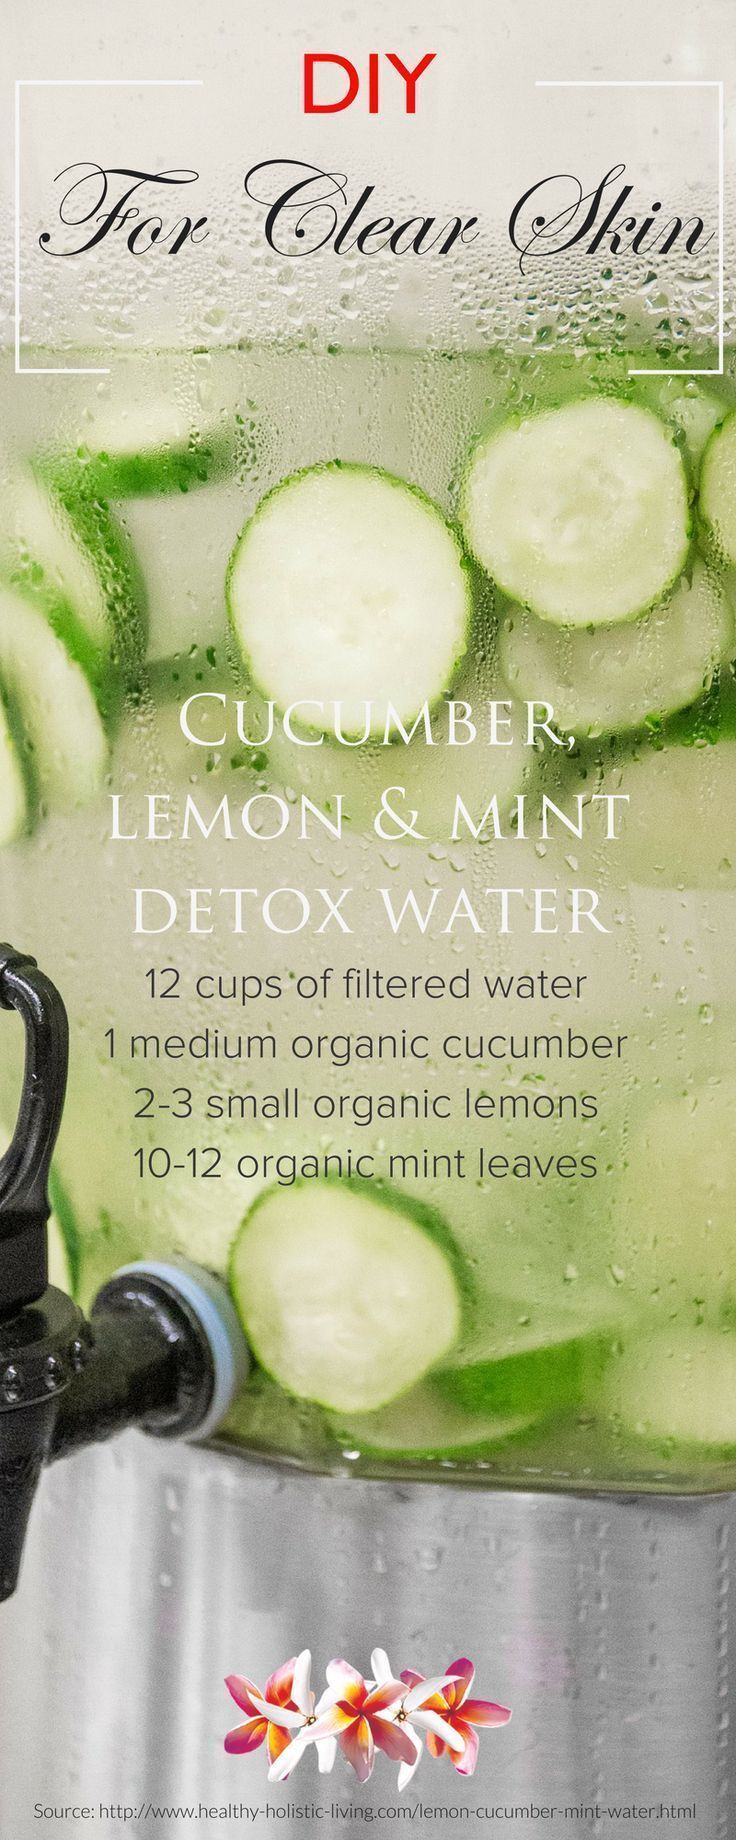 5 detox water recipes for maintaining a healthy clear skin! Discover DIY beauty recipes and natural skin care tips at